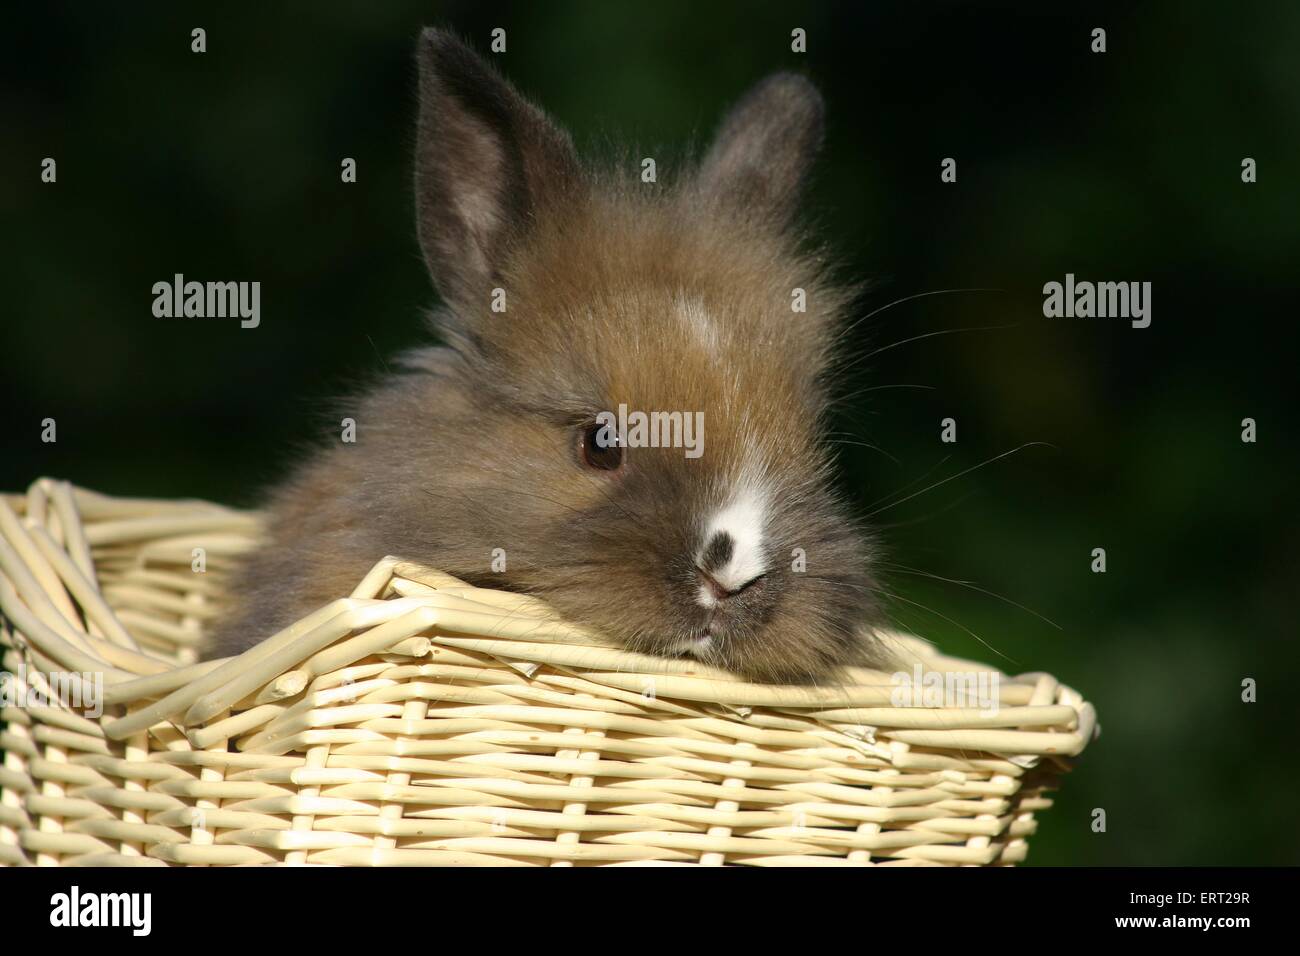 bunny in a basket Stock Photo